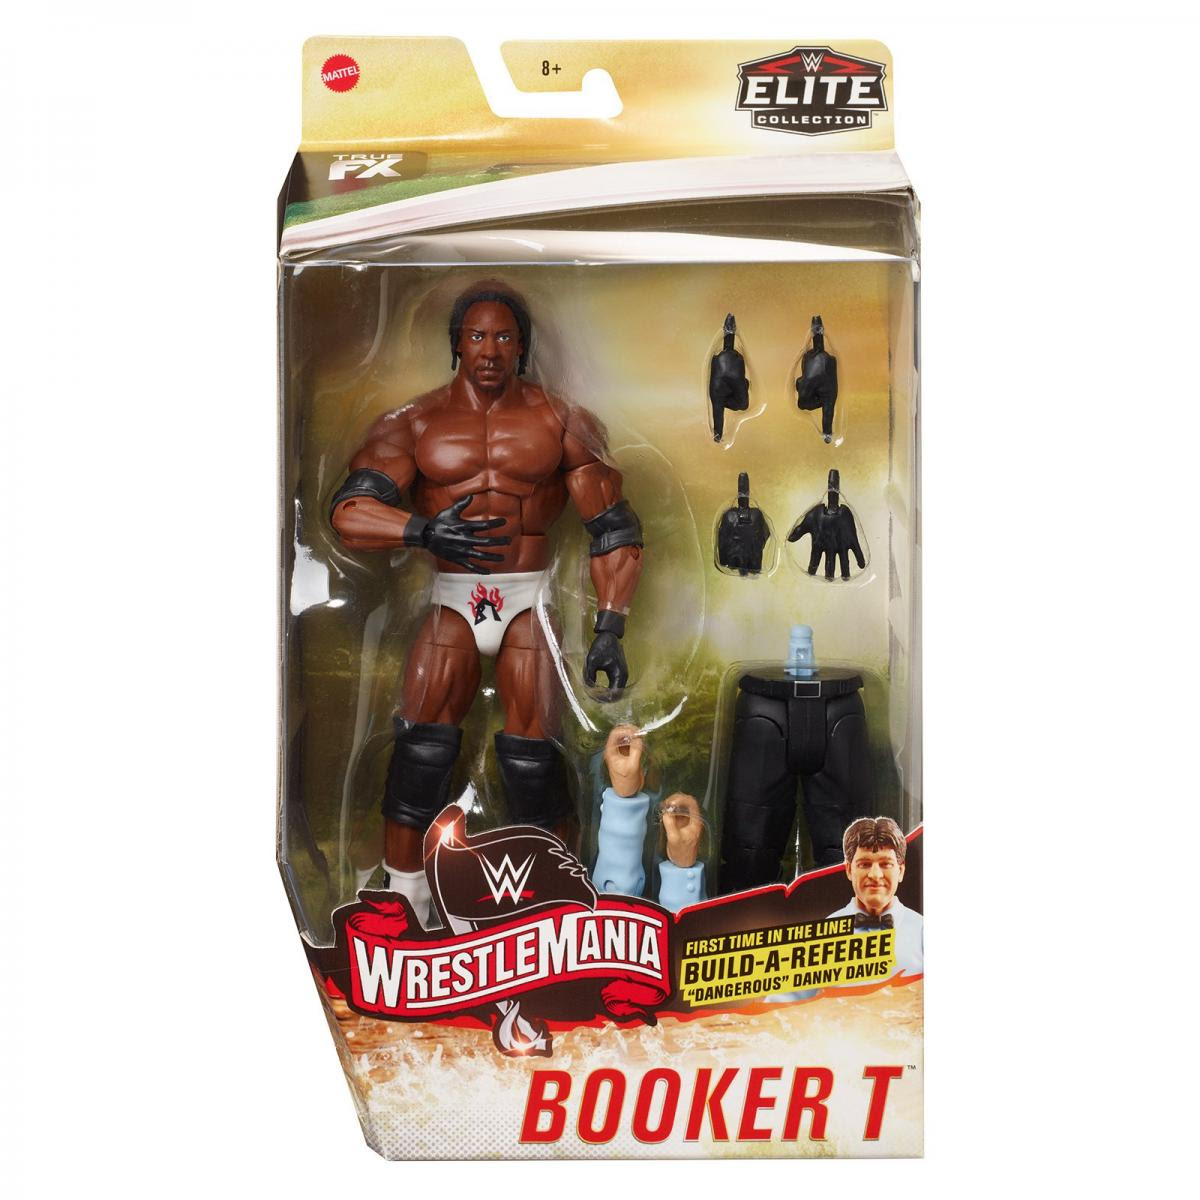 Image of WWE Wrestlemania 36 Elite Collection - Booker T - DECEMBER 2019